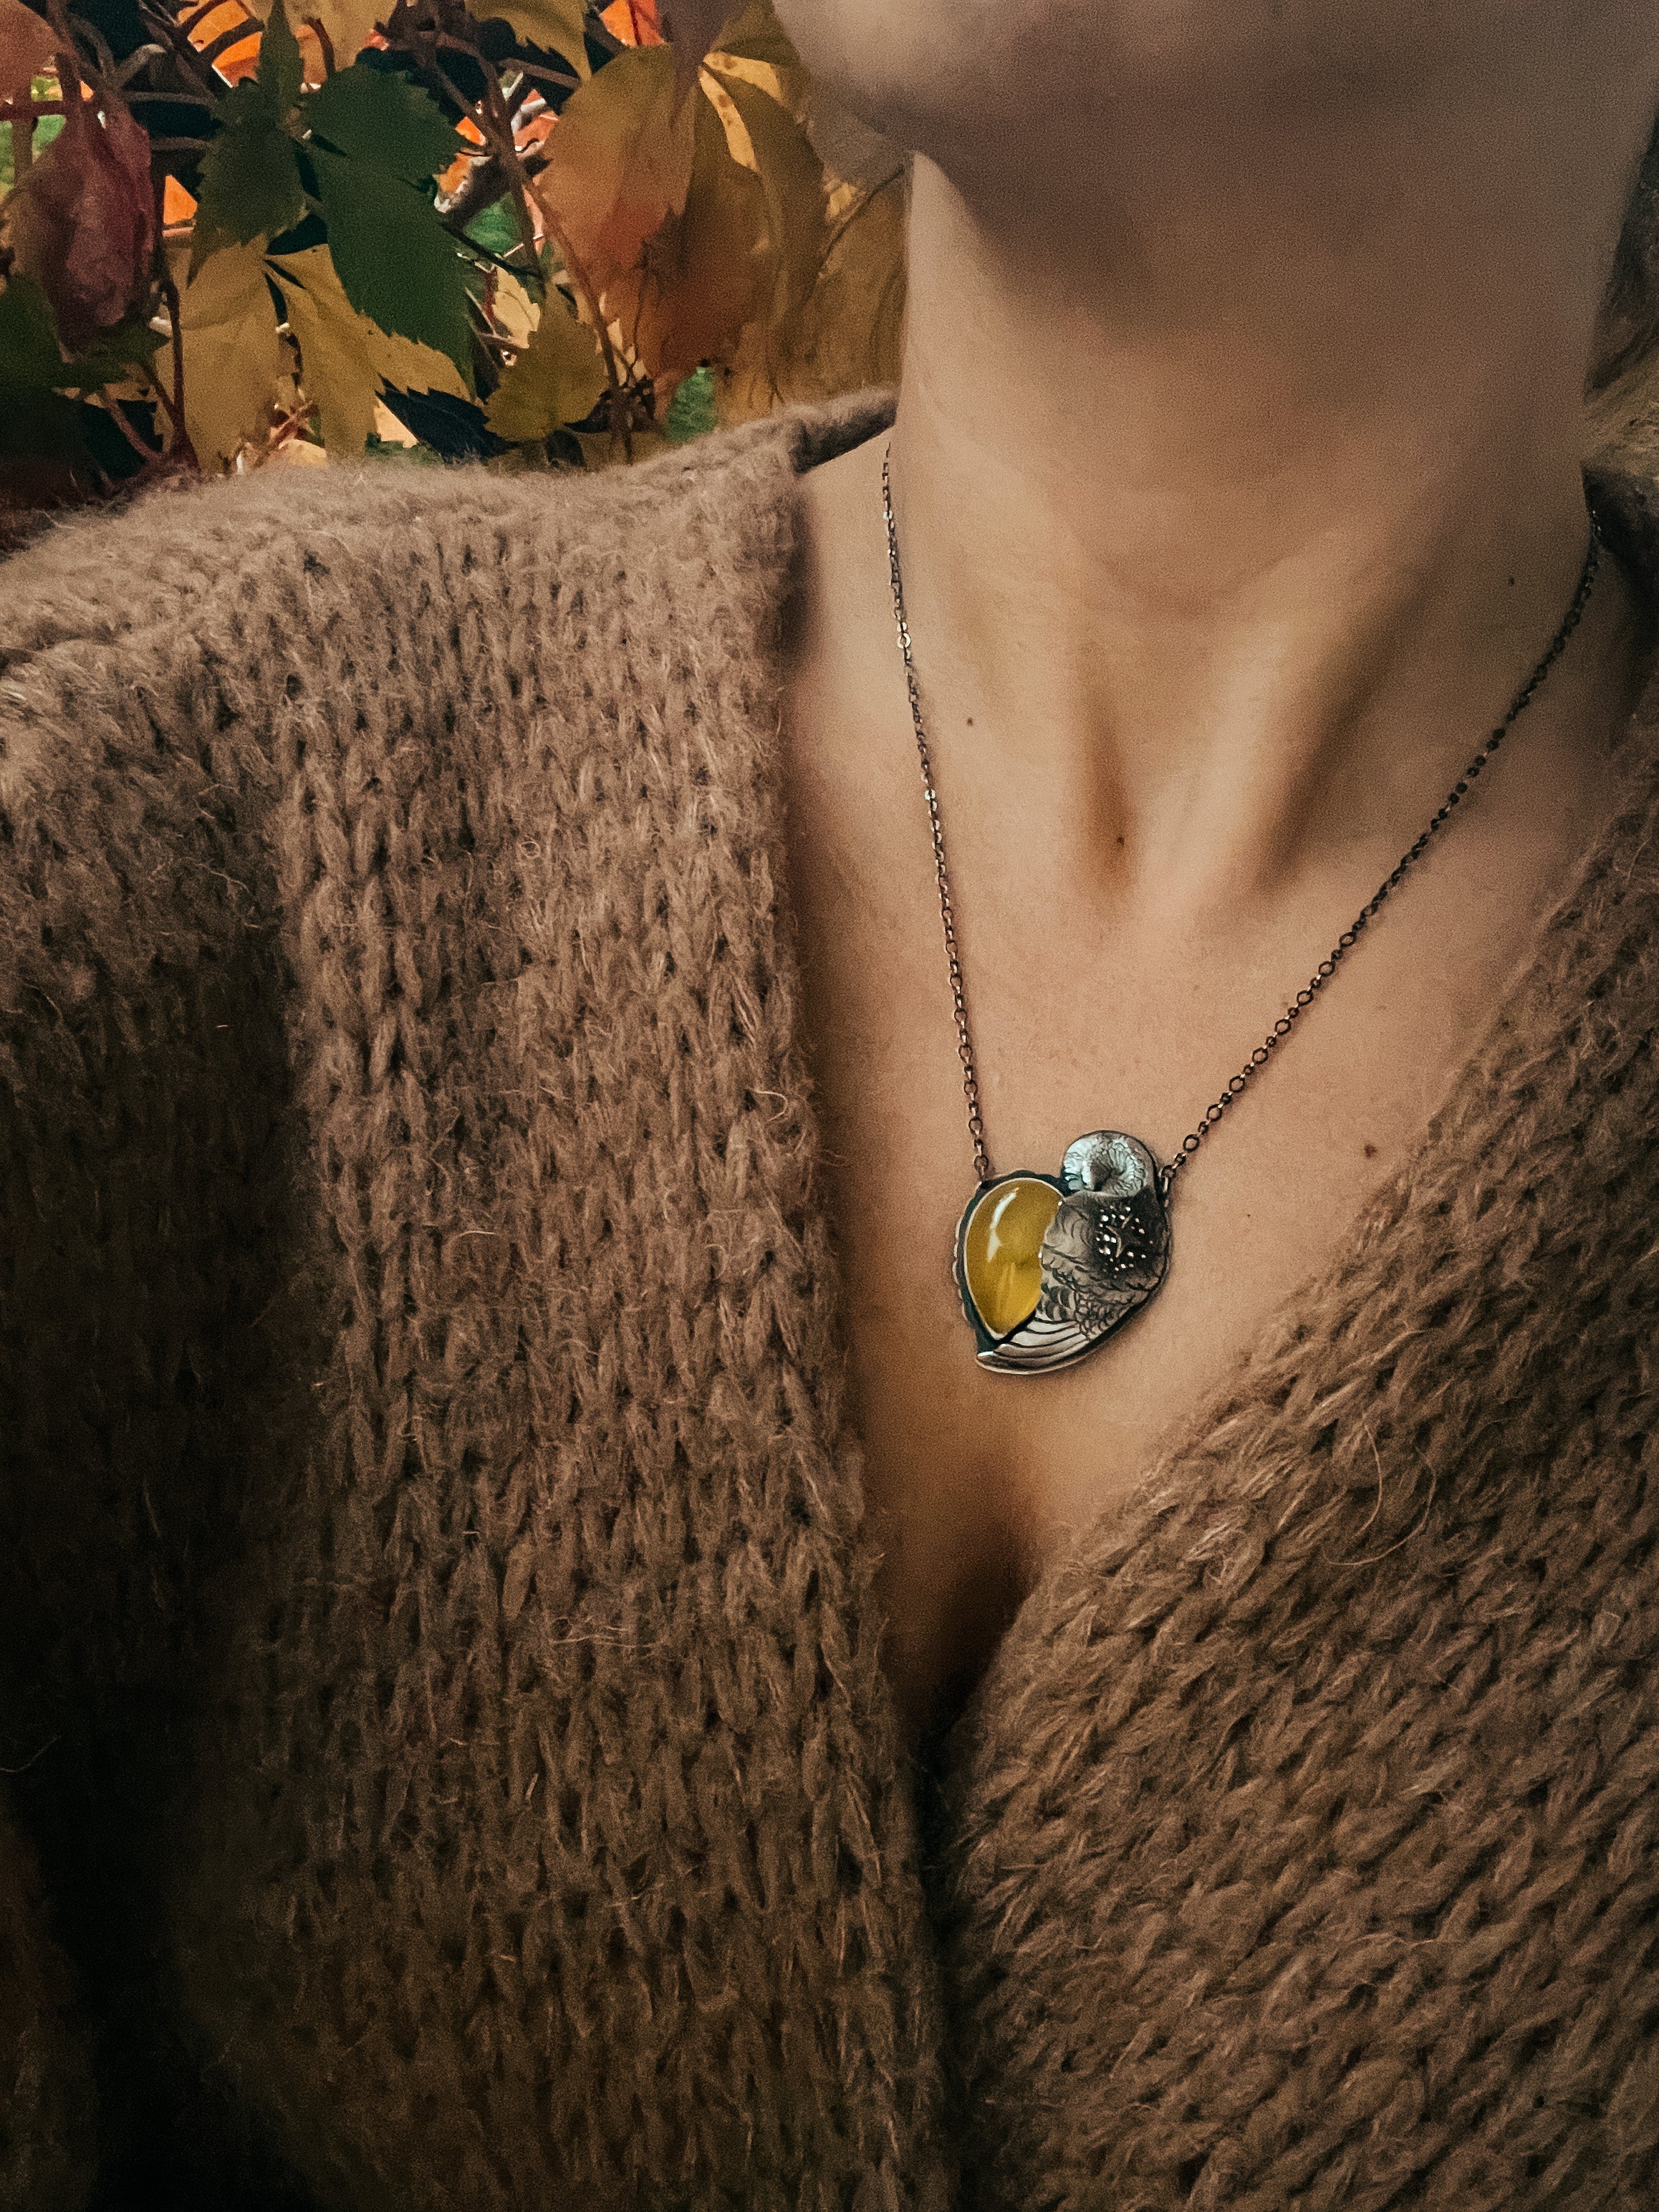 The Sleeping Barn Owl Necklace - Amber of your Choice